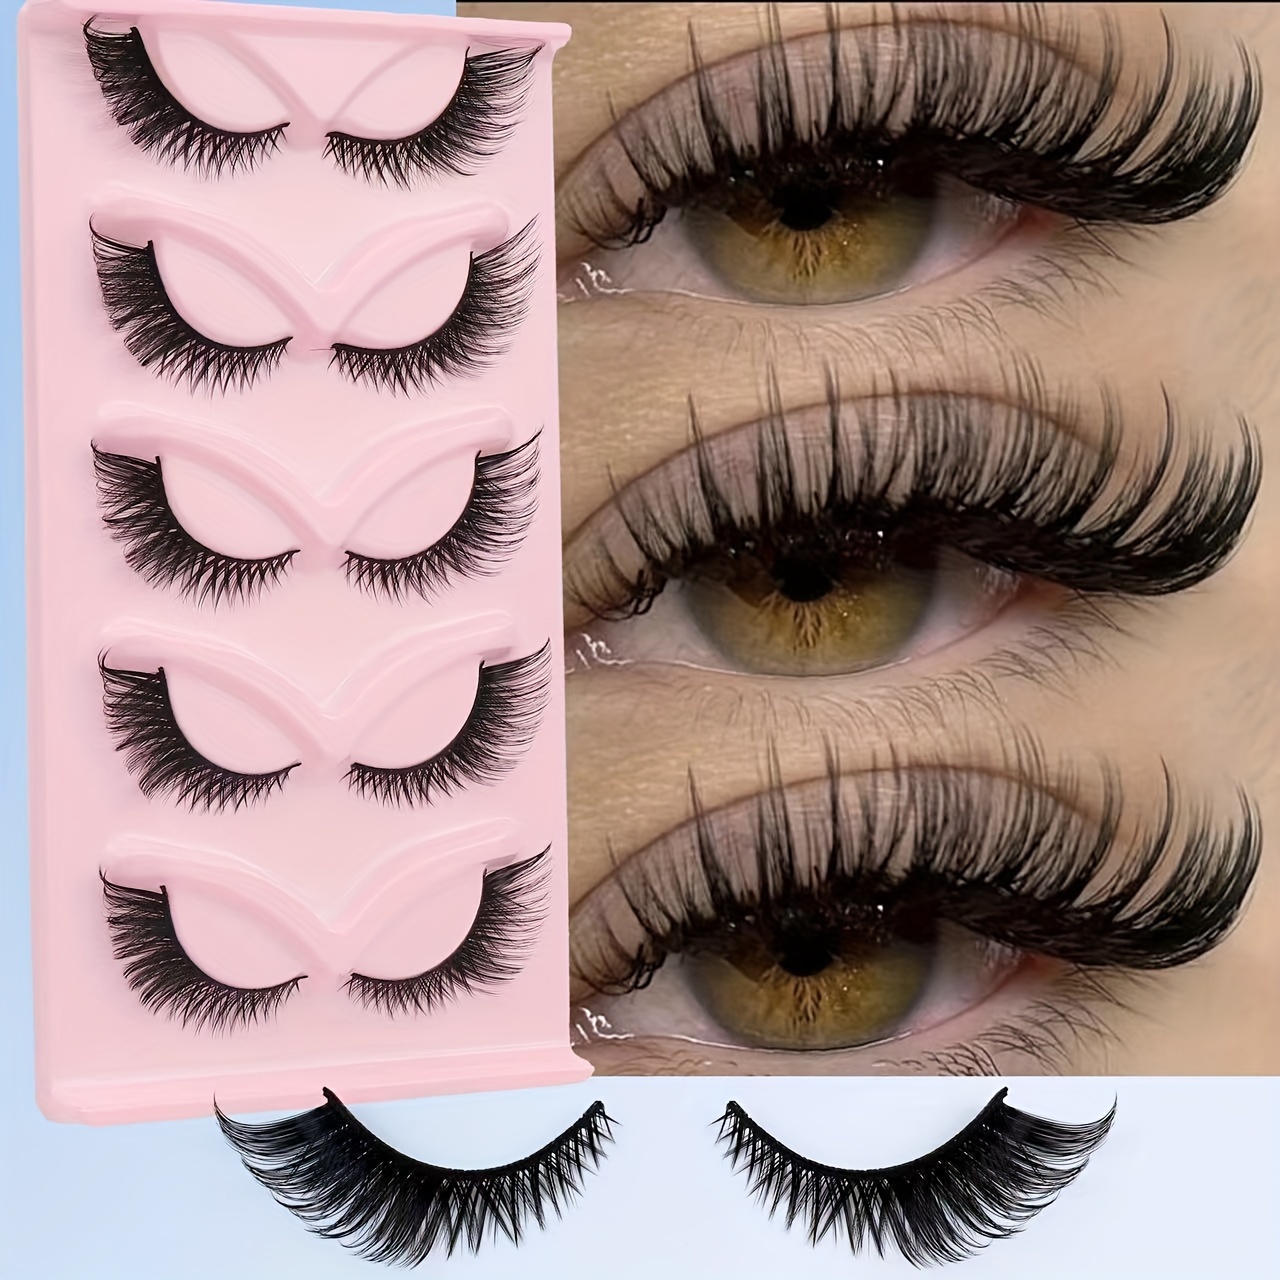 

Manga-inspired Cat Eye False Eyelashes - Natural, Long & Wispy With Winged Ends For Extended Eye Look | Beginner-friendly, Reusable & Self-adhesive